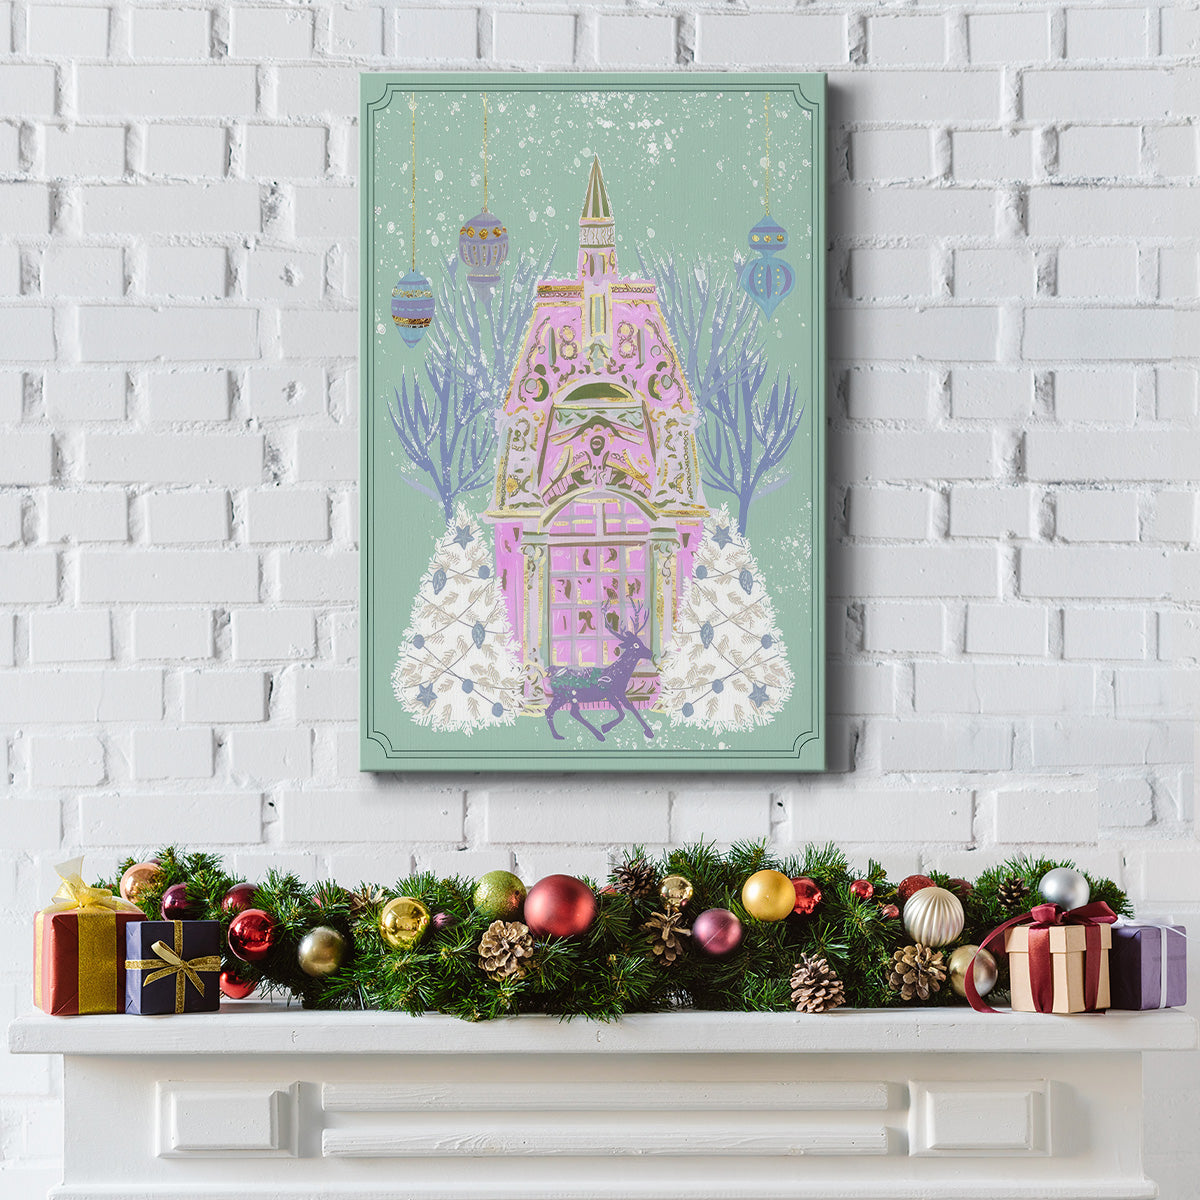 Winter Holidays I - Gallery Wrapped Canvas